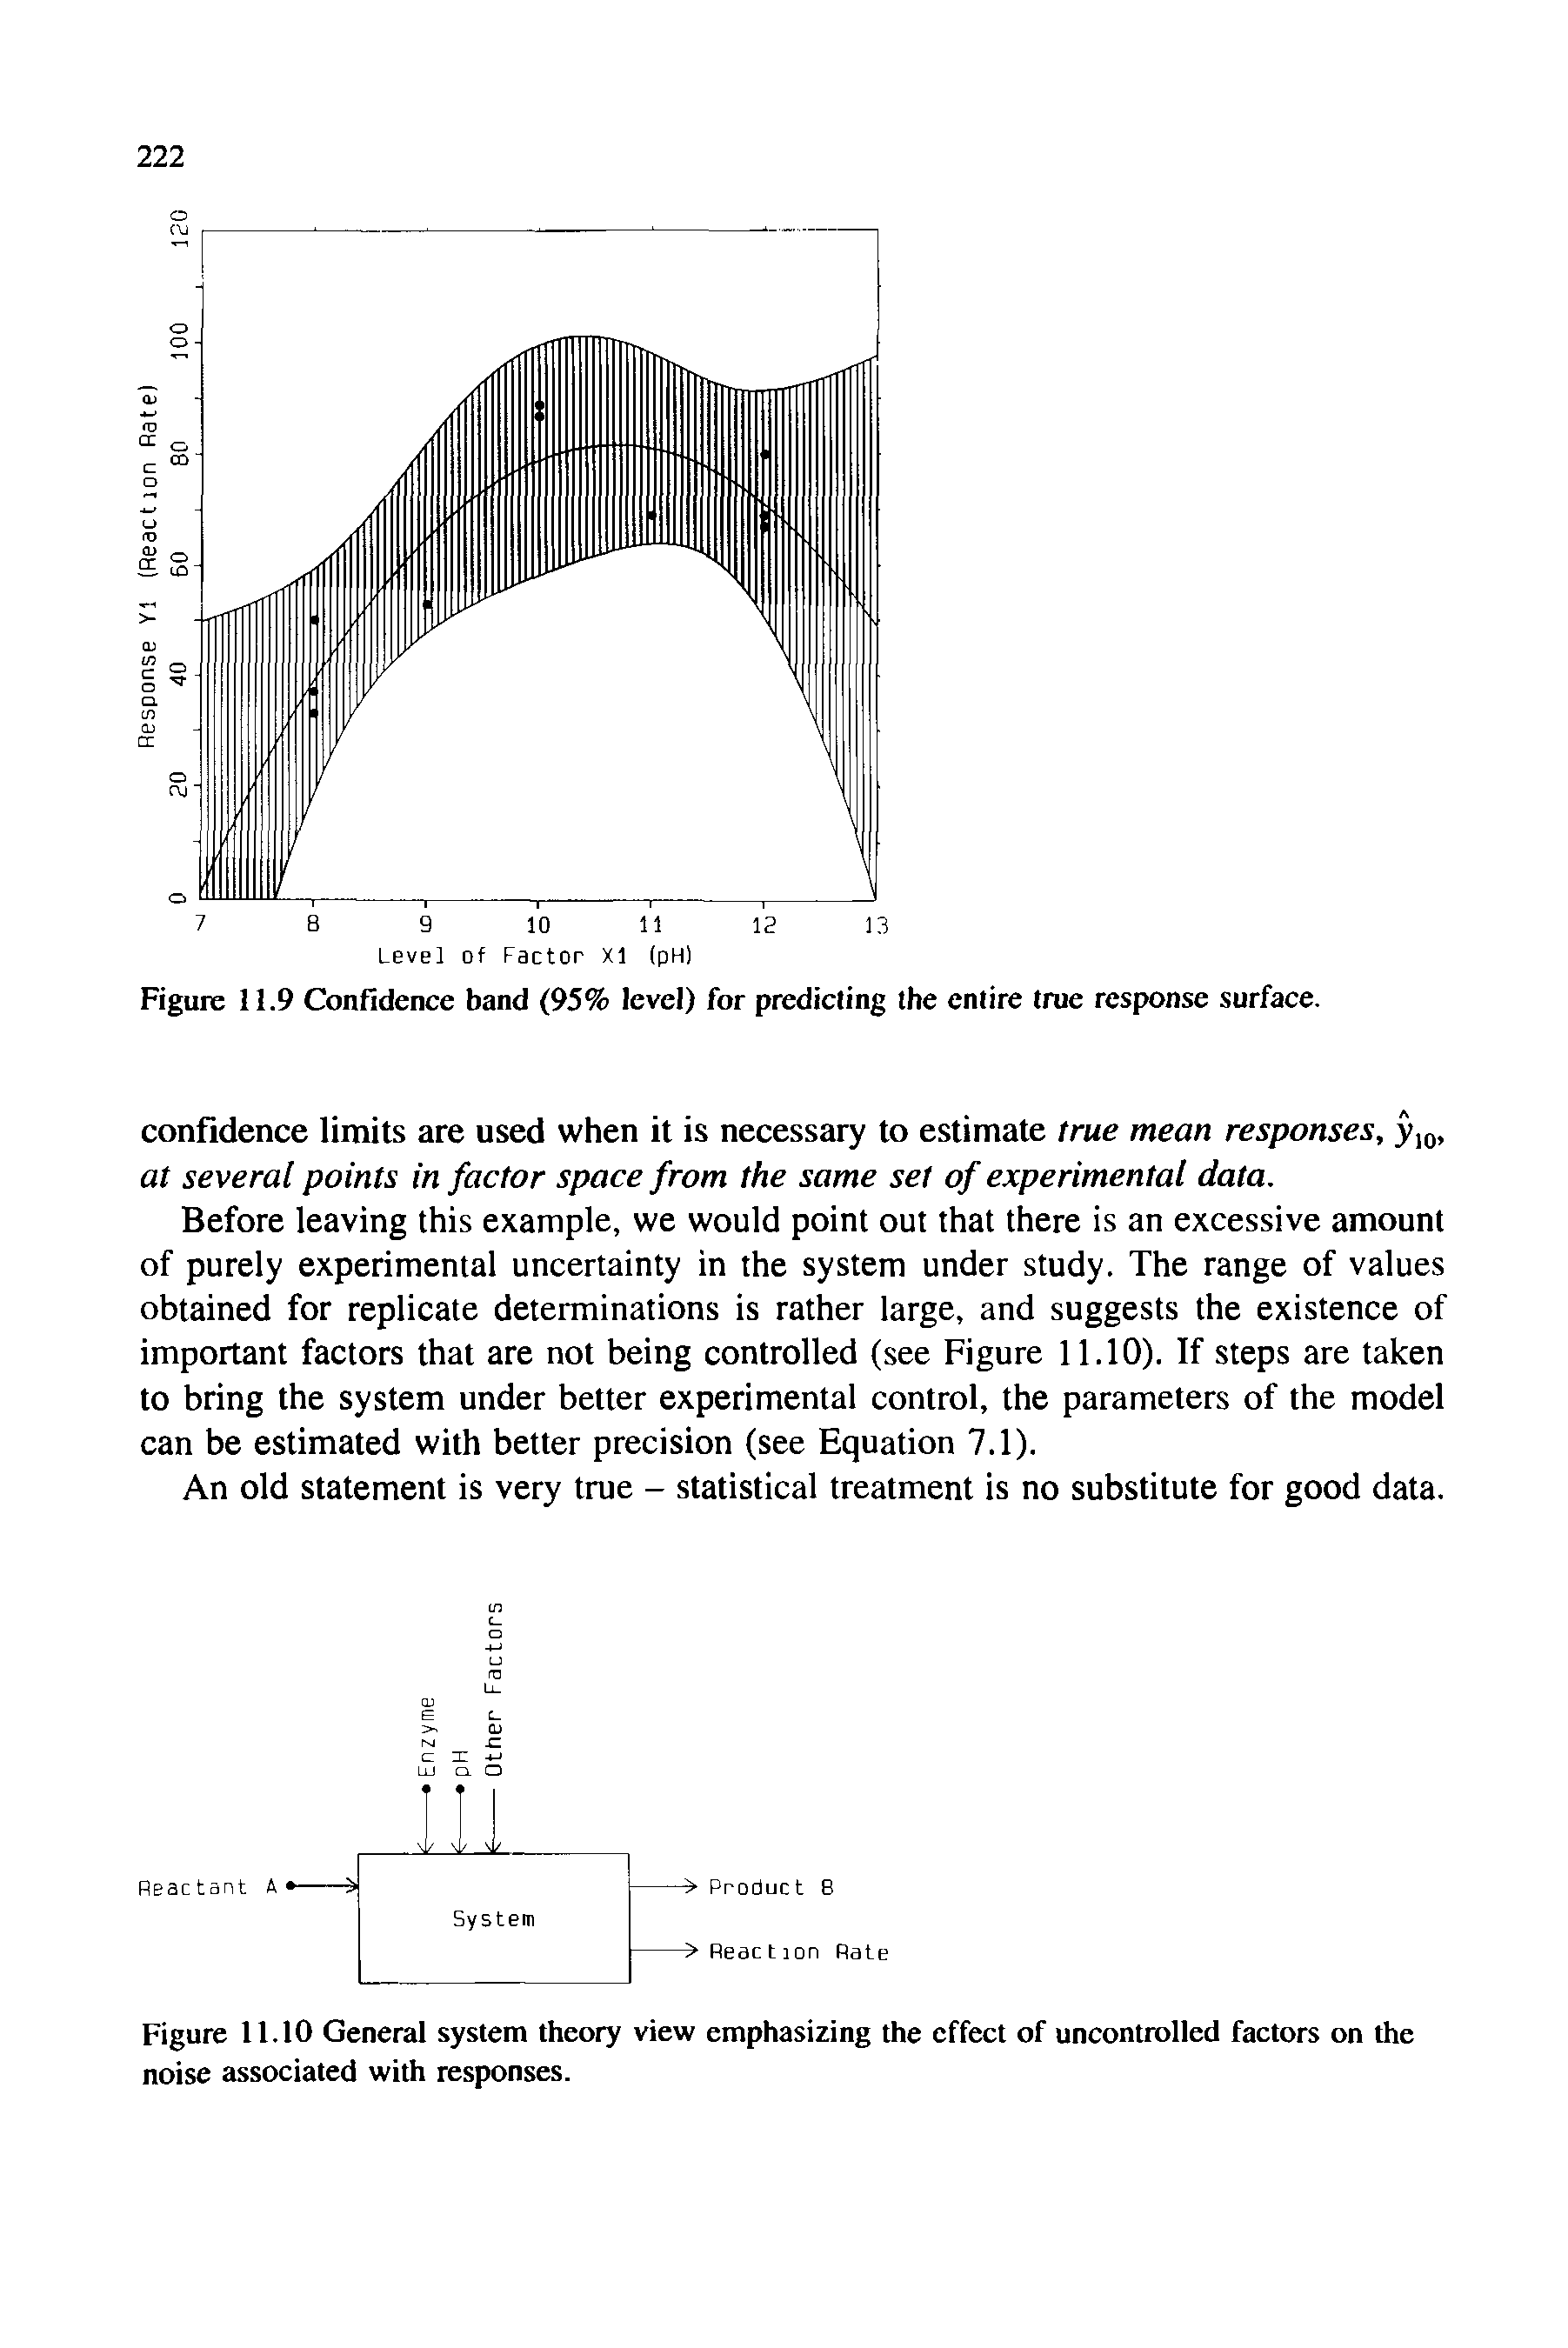 Figure 11.10 General system theory view emphasizing the effect of uncontrolled factors on the noise associated with responses.